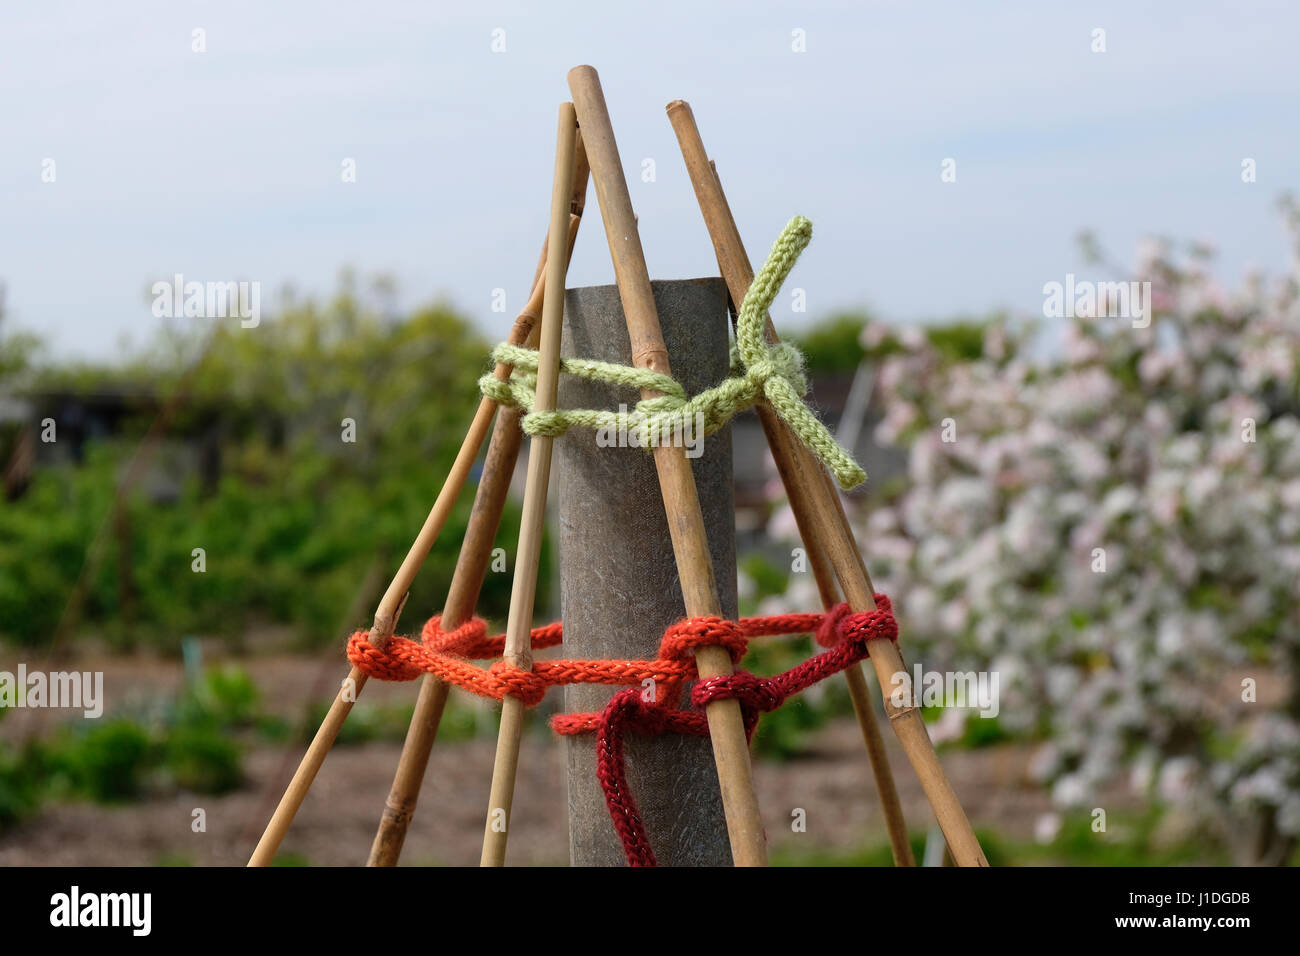 Leftover wool used to make twine to tie up bamboo wigwam in garden Stock Photo